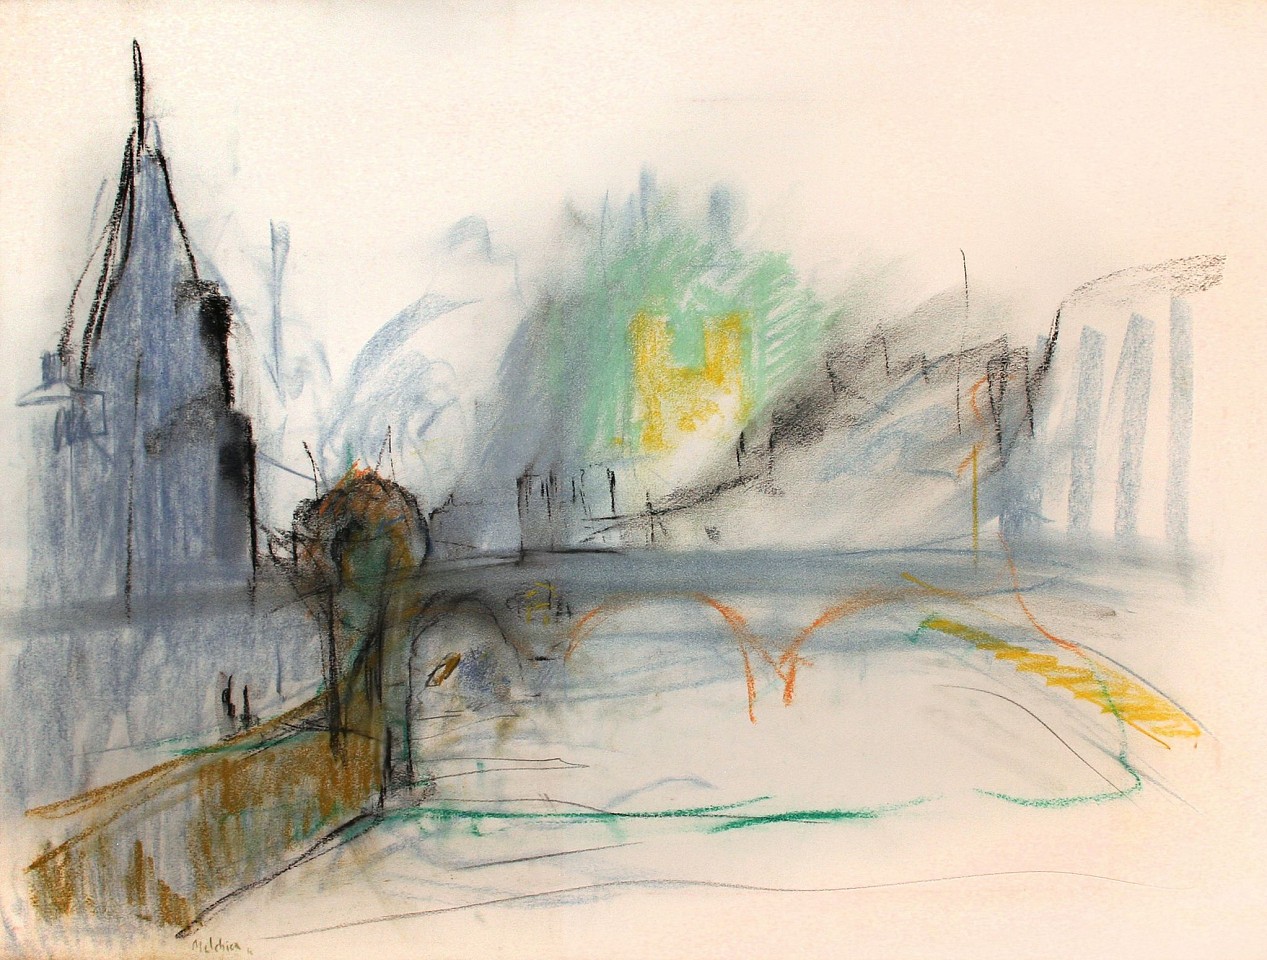 Isabelle Melchior, Paris, 2011
pastel on paper, 22" x 30", 30" x 38" framed.
IM 1226
Price Upon Request